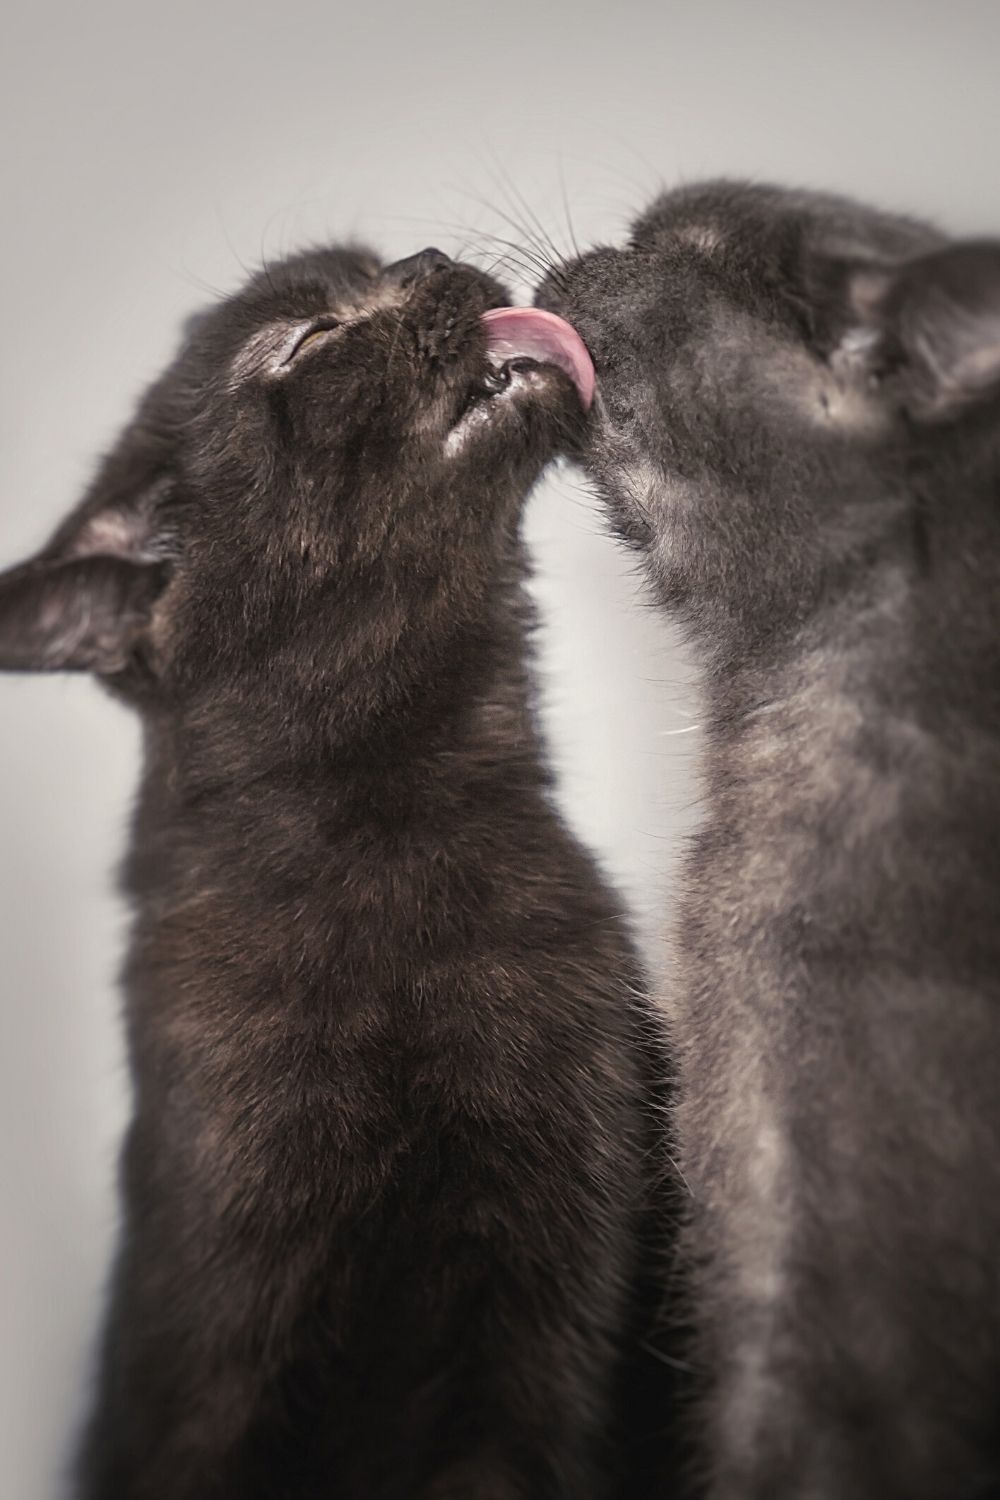 One reason cats lick each other because they're helping each other clean themselves